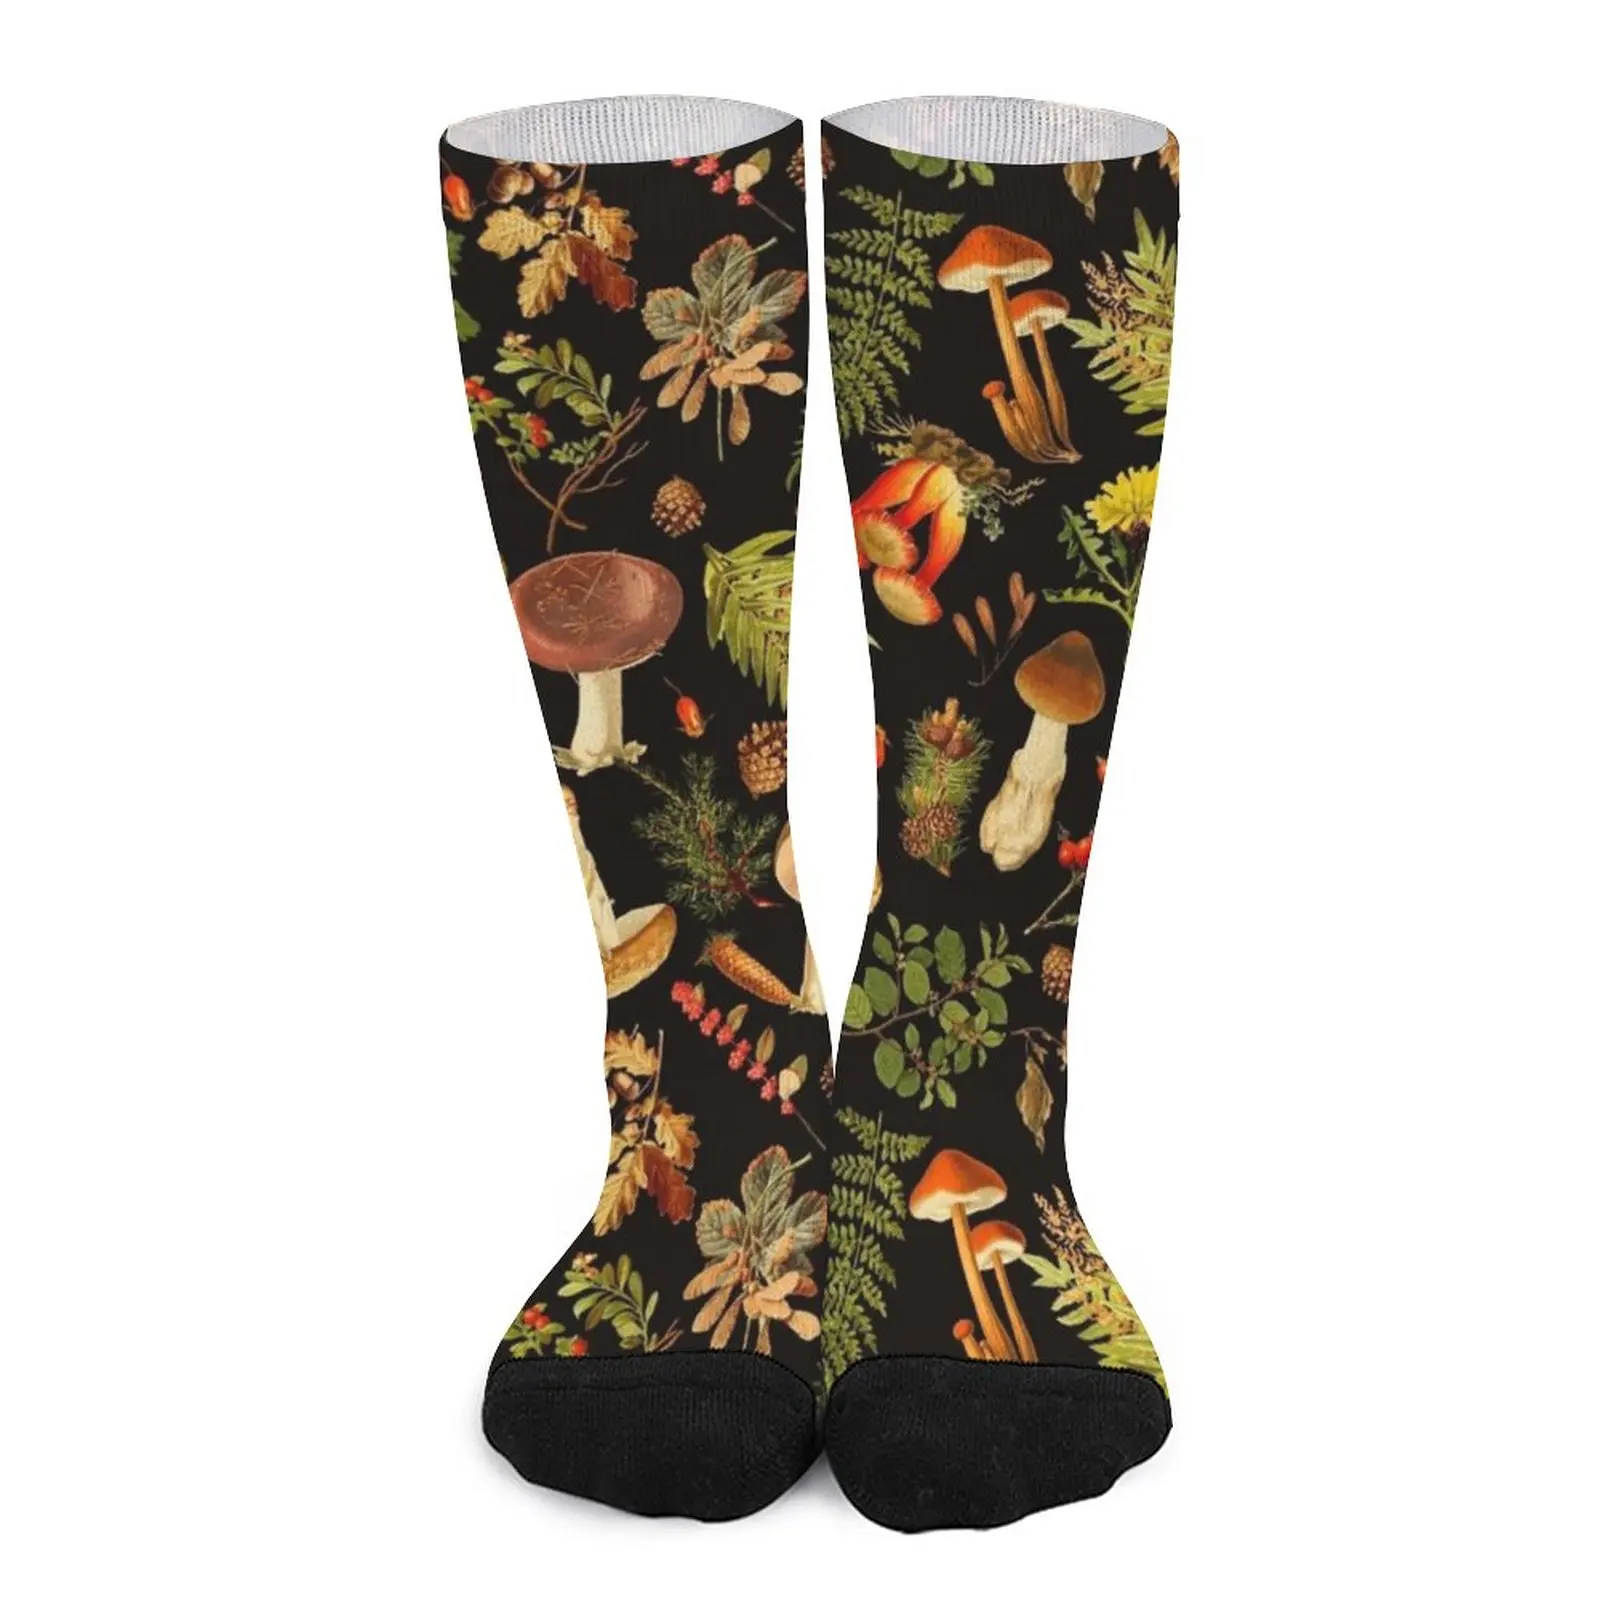 Vintage toxic mushrooms forest pattern on black Socks Women's compression socks sock men 15colors face painting body makeup non toxic watercolor with brush and decals for child christmas halloween carnival party